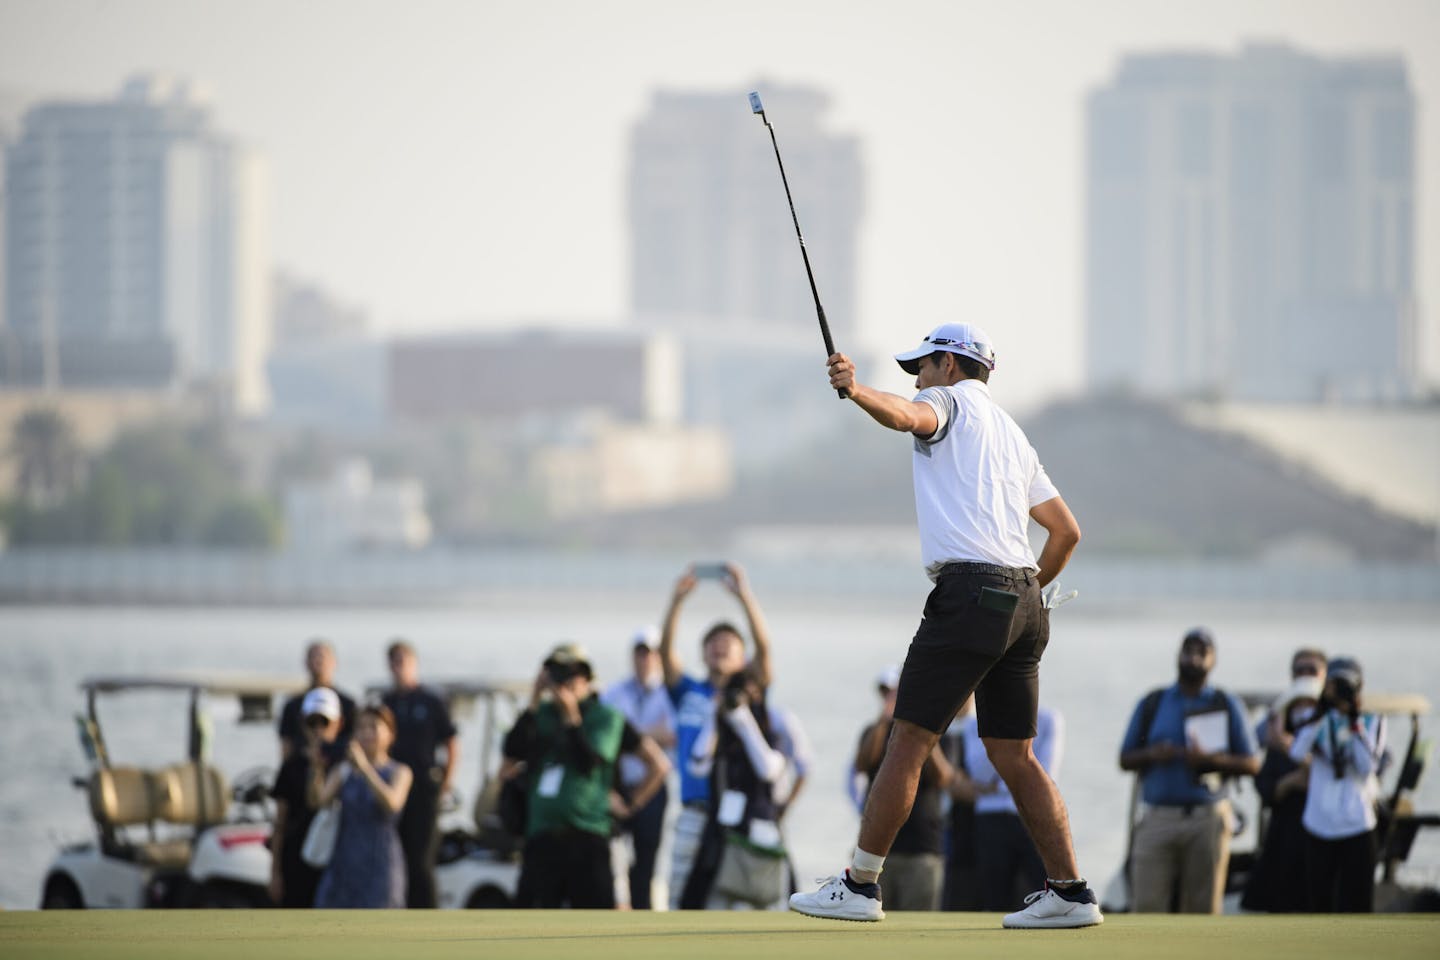 Keita Nakajima of Japan celebrates on the 18th green after winning on the second playoff hole during round 4